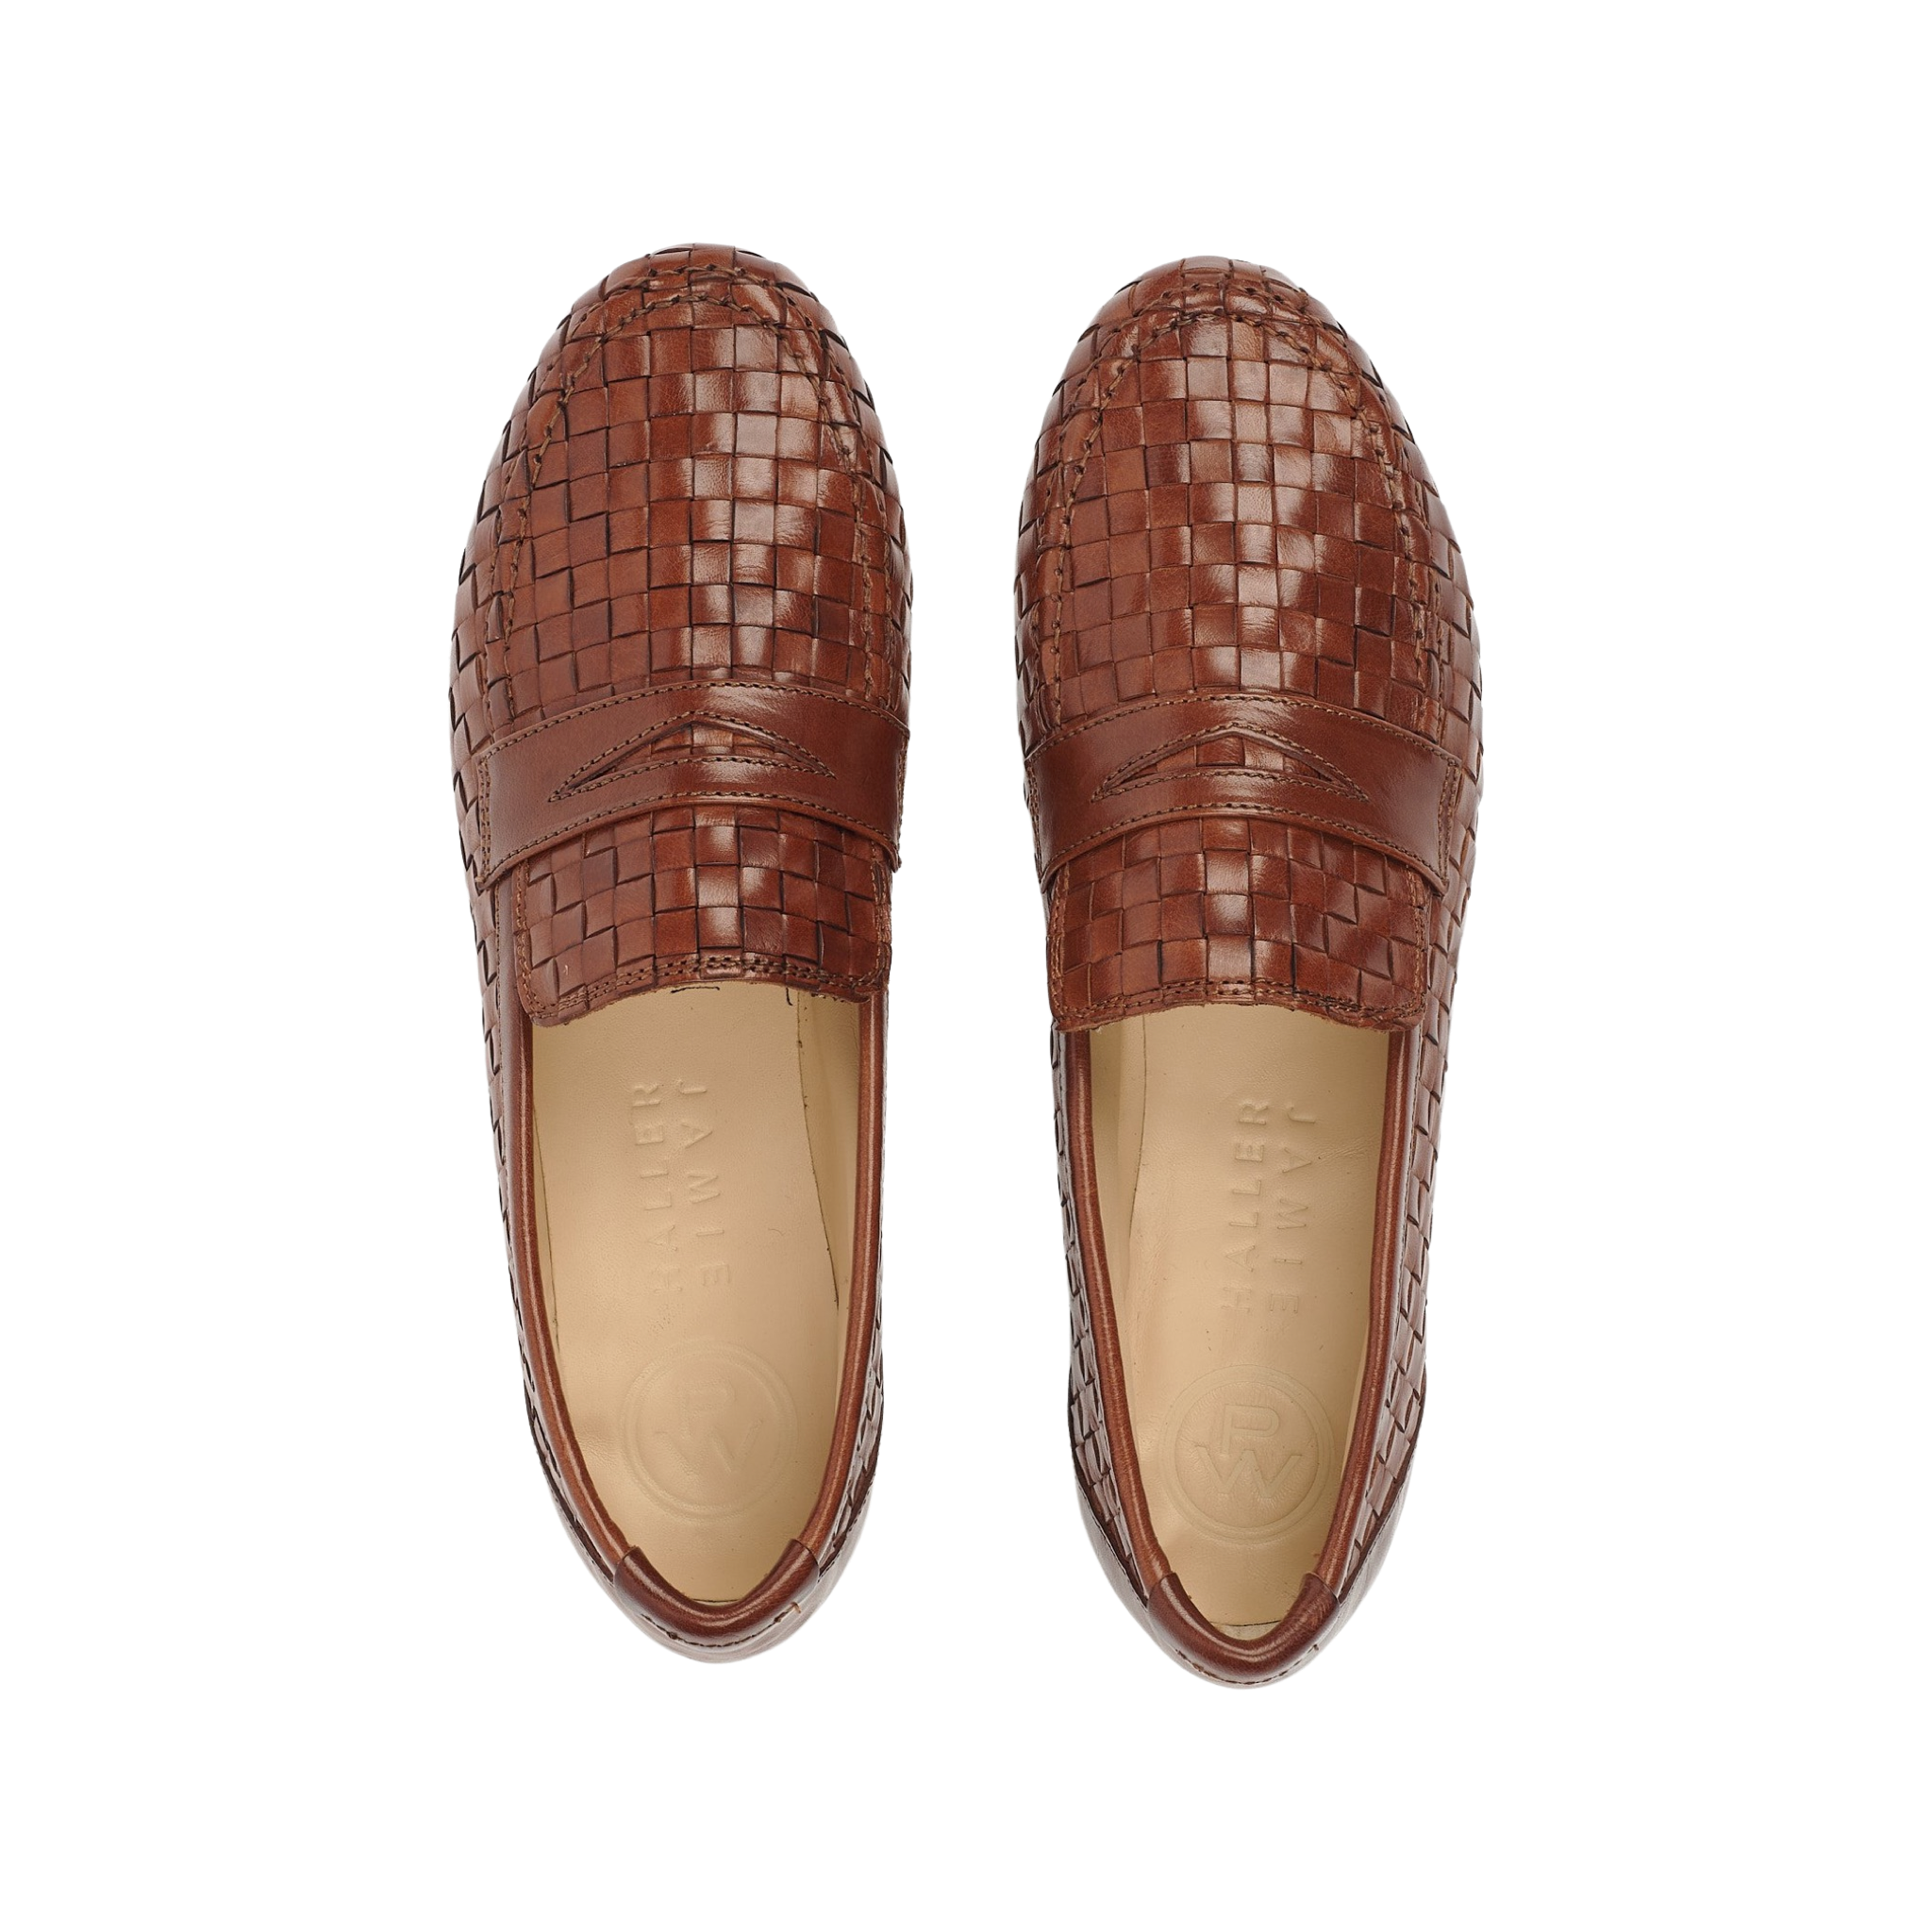 Jamie Haller X Pw Woven Loafer